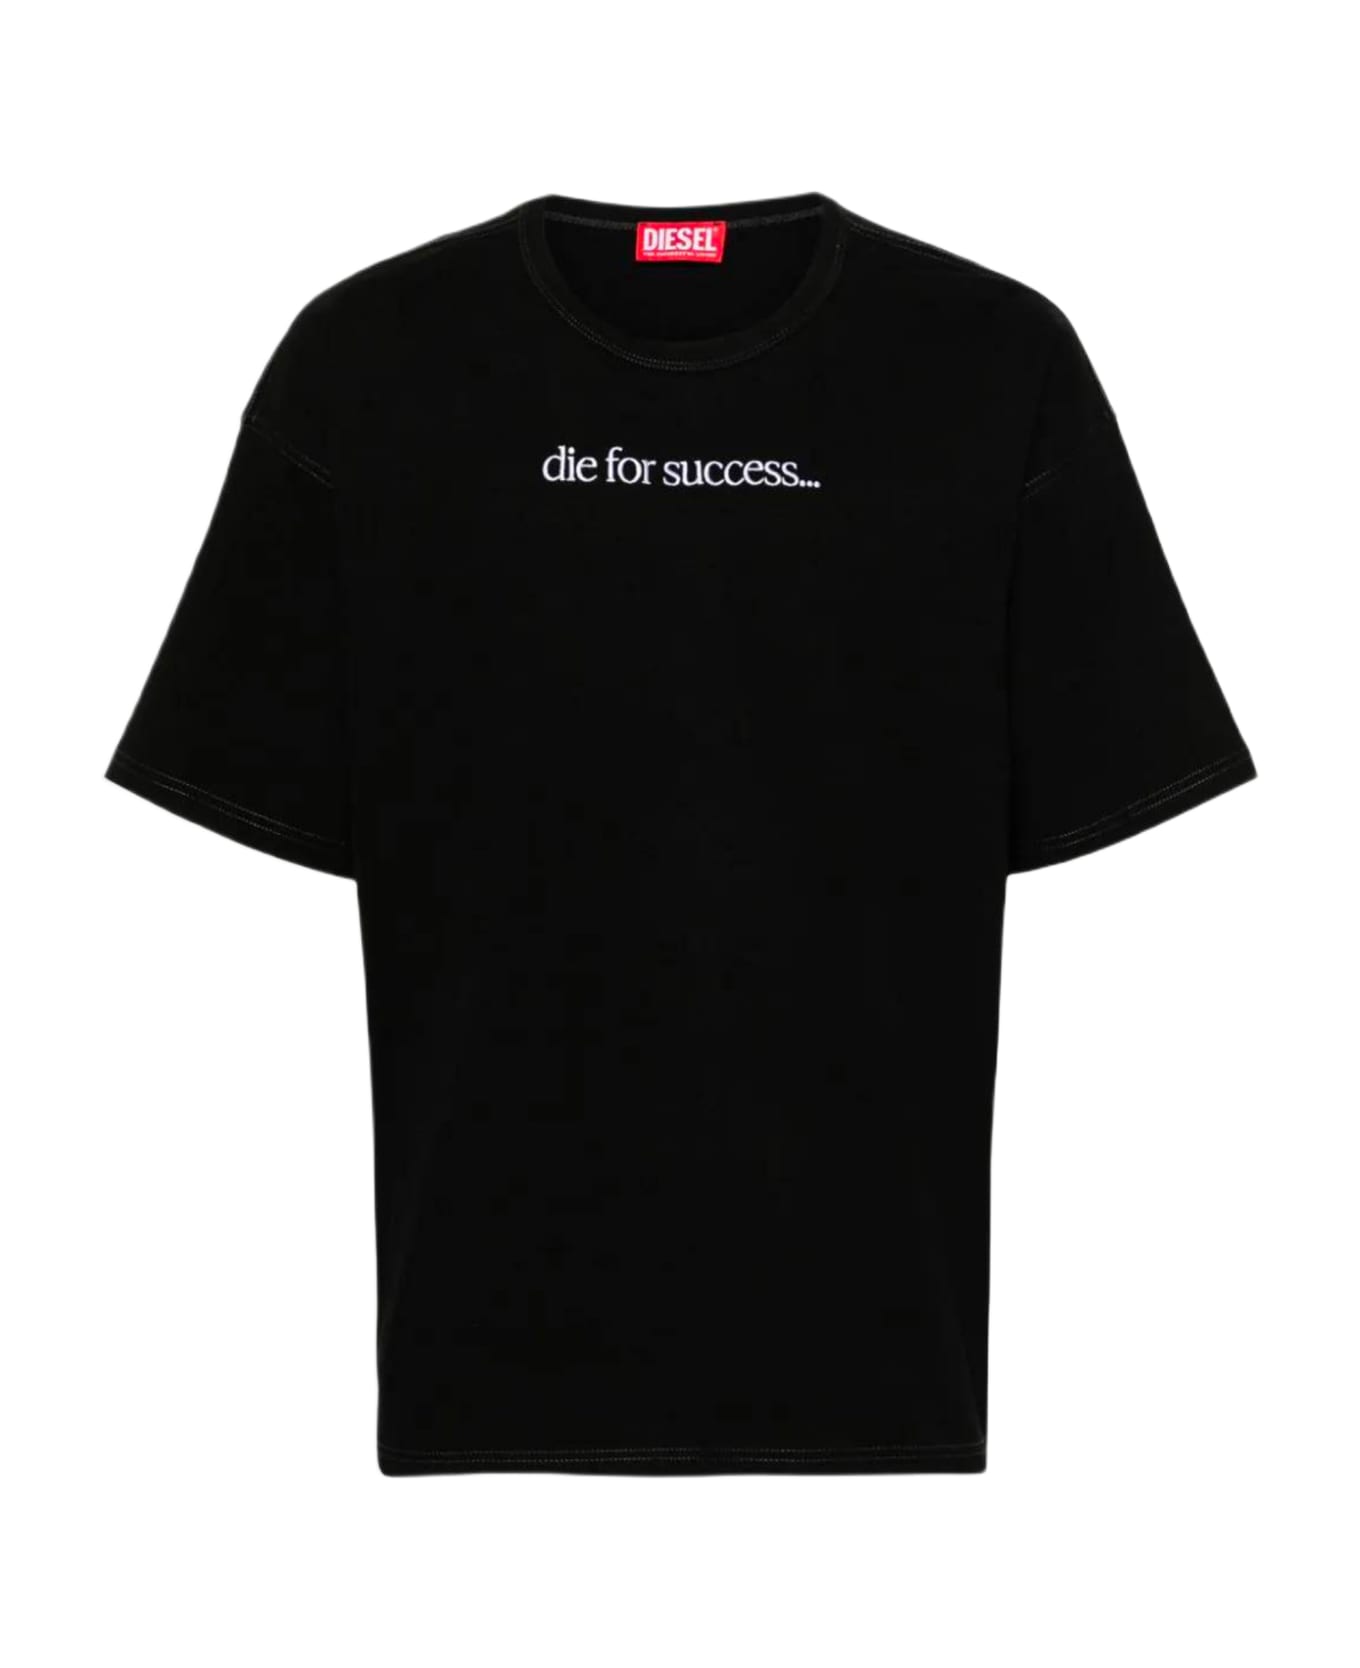 Diesel 0nfae T-box-n6 Black cotton t-shirt with front slogan embroidery - T Boxt N6 - Nero